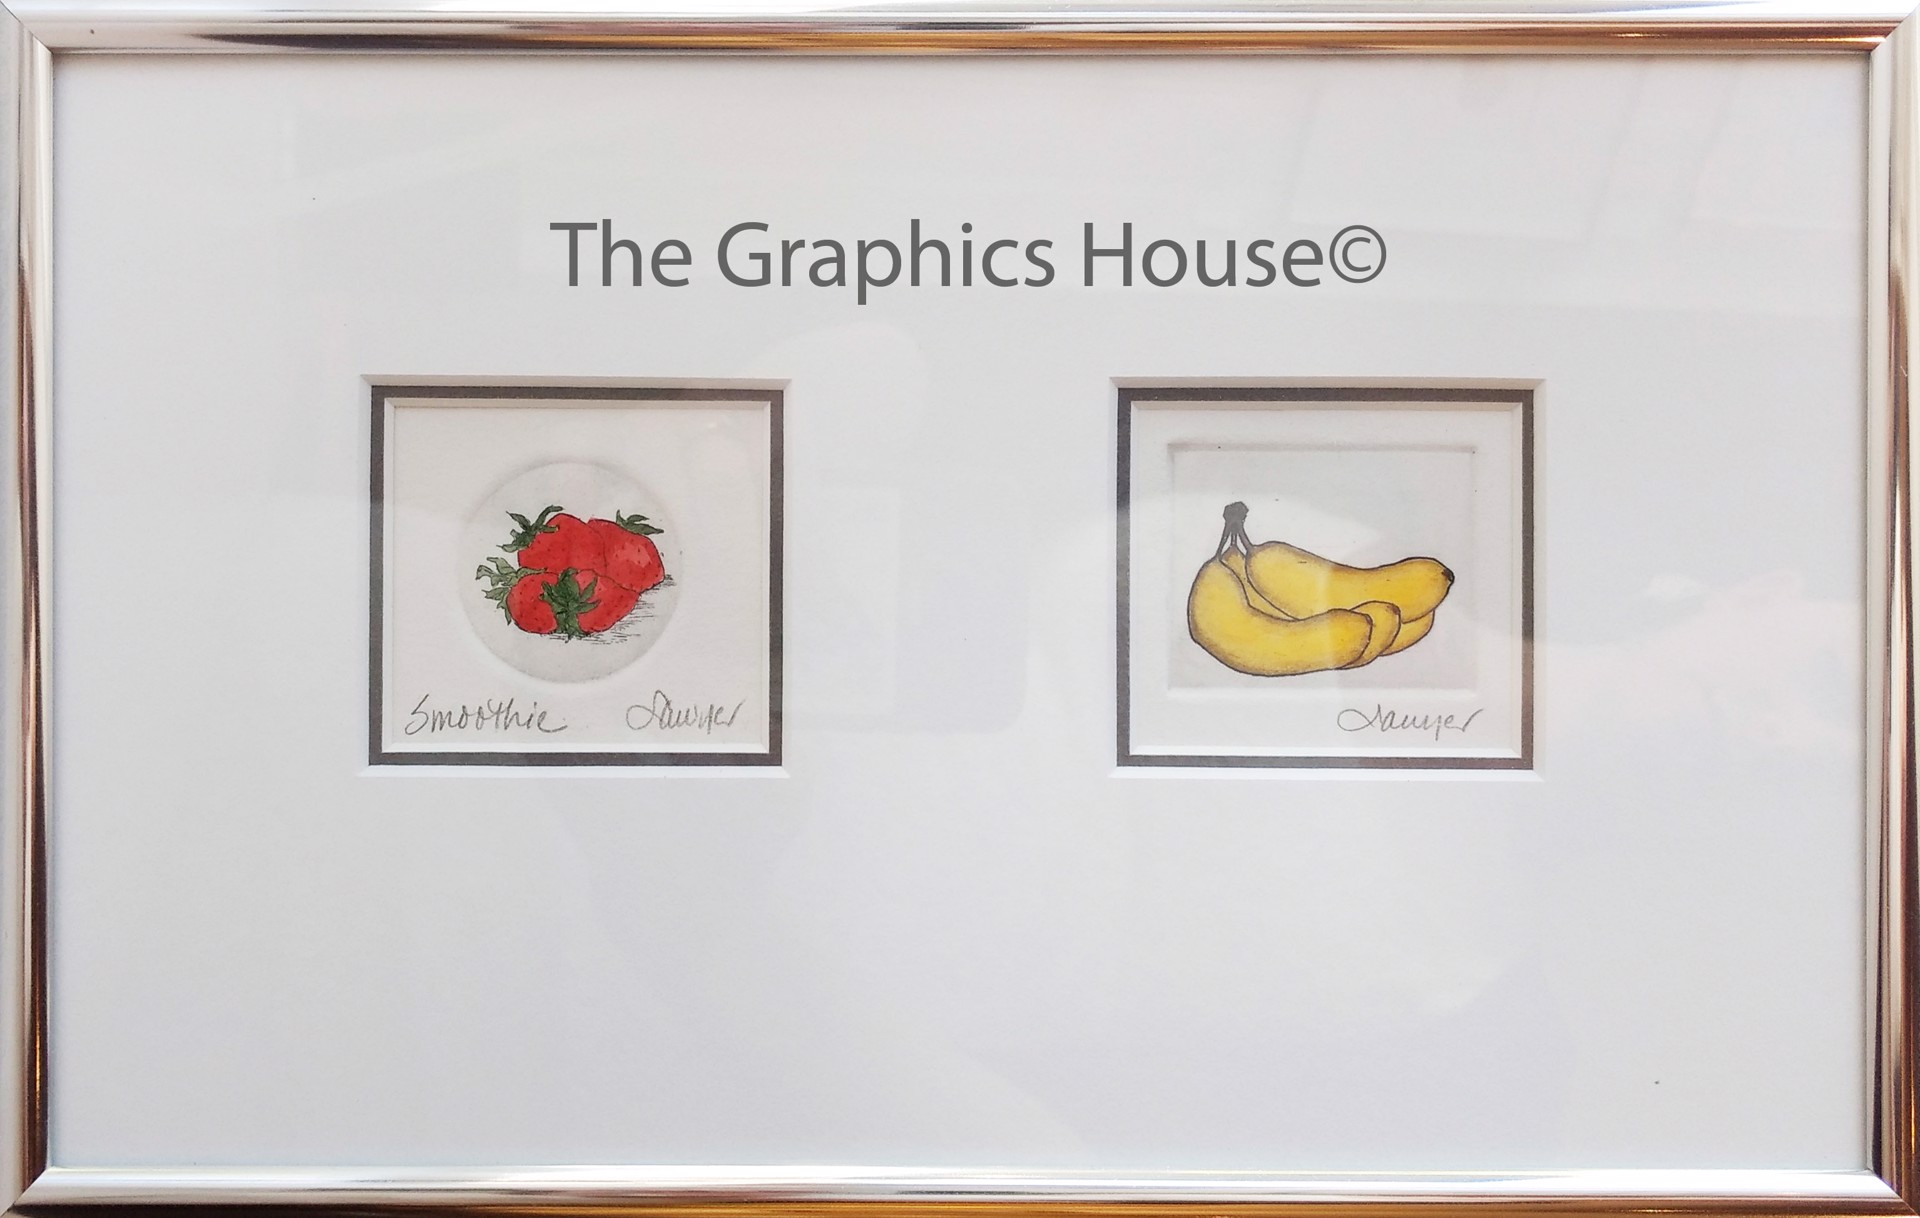 Strawberries and Bananas (framed) by Anne Sawyer